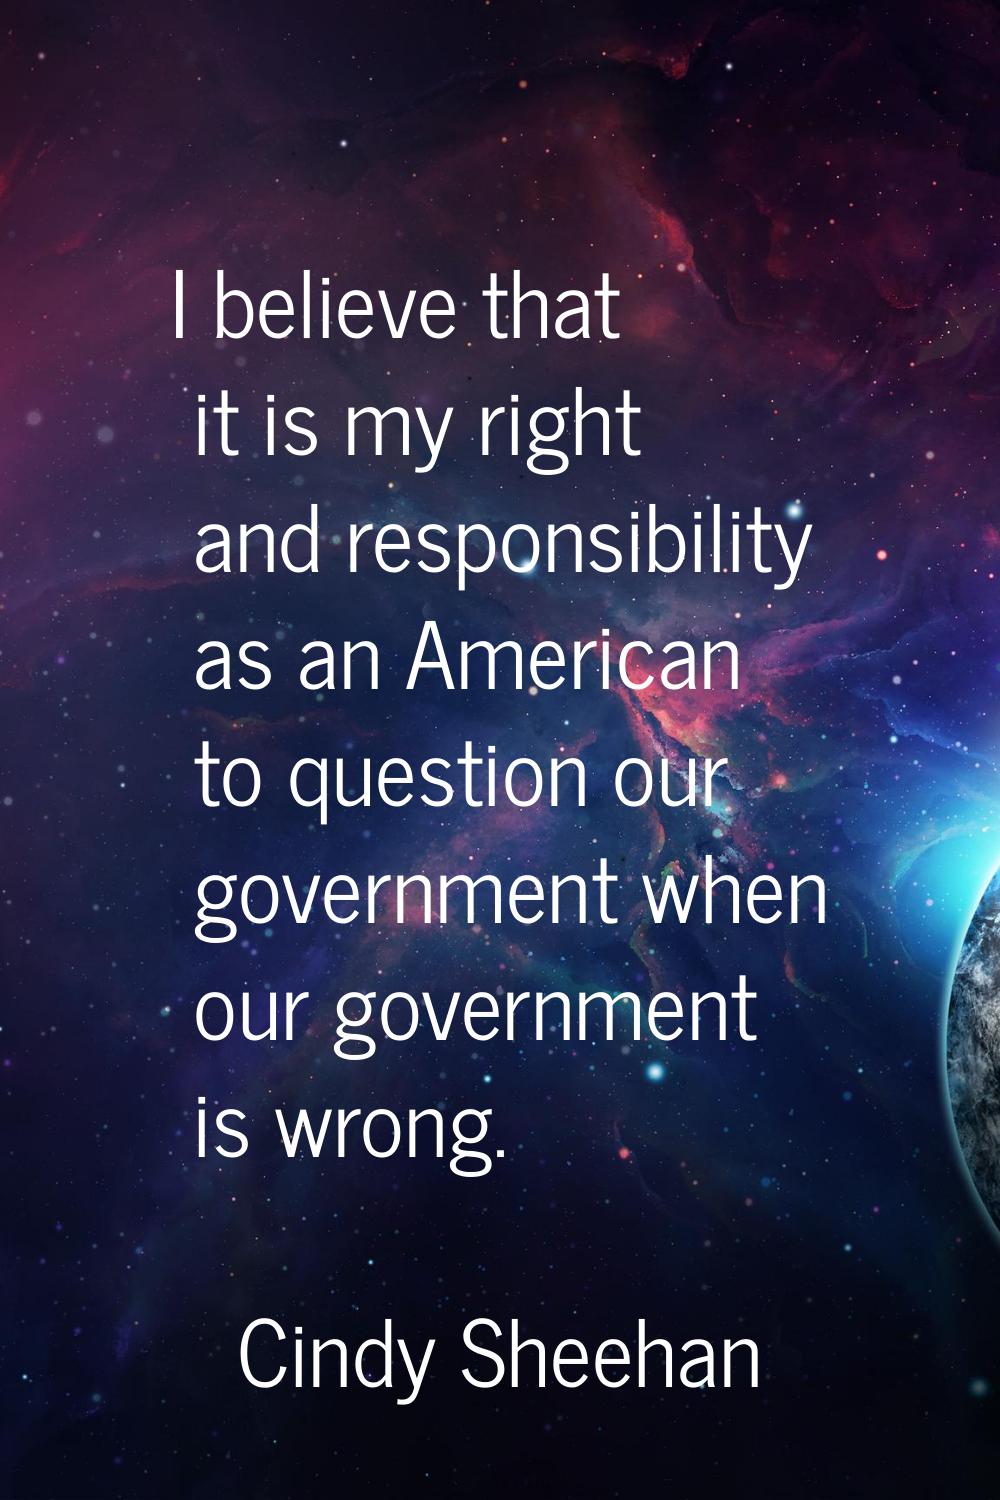 I believe that it is my right and responsibility as an American to question our government when our